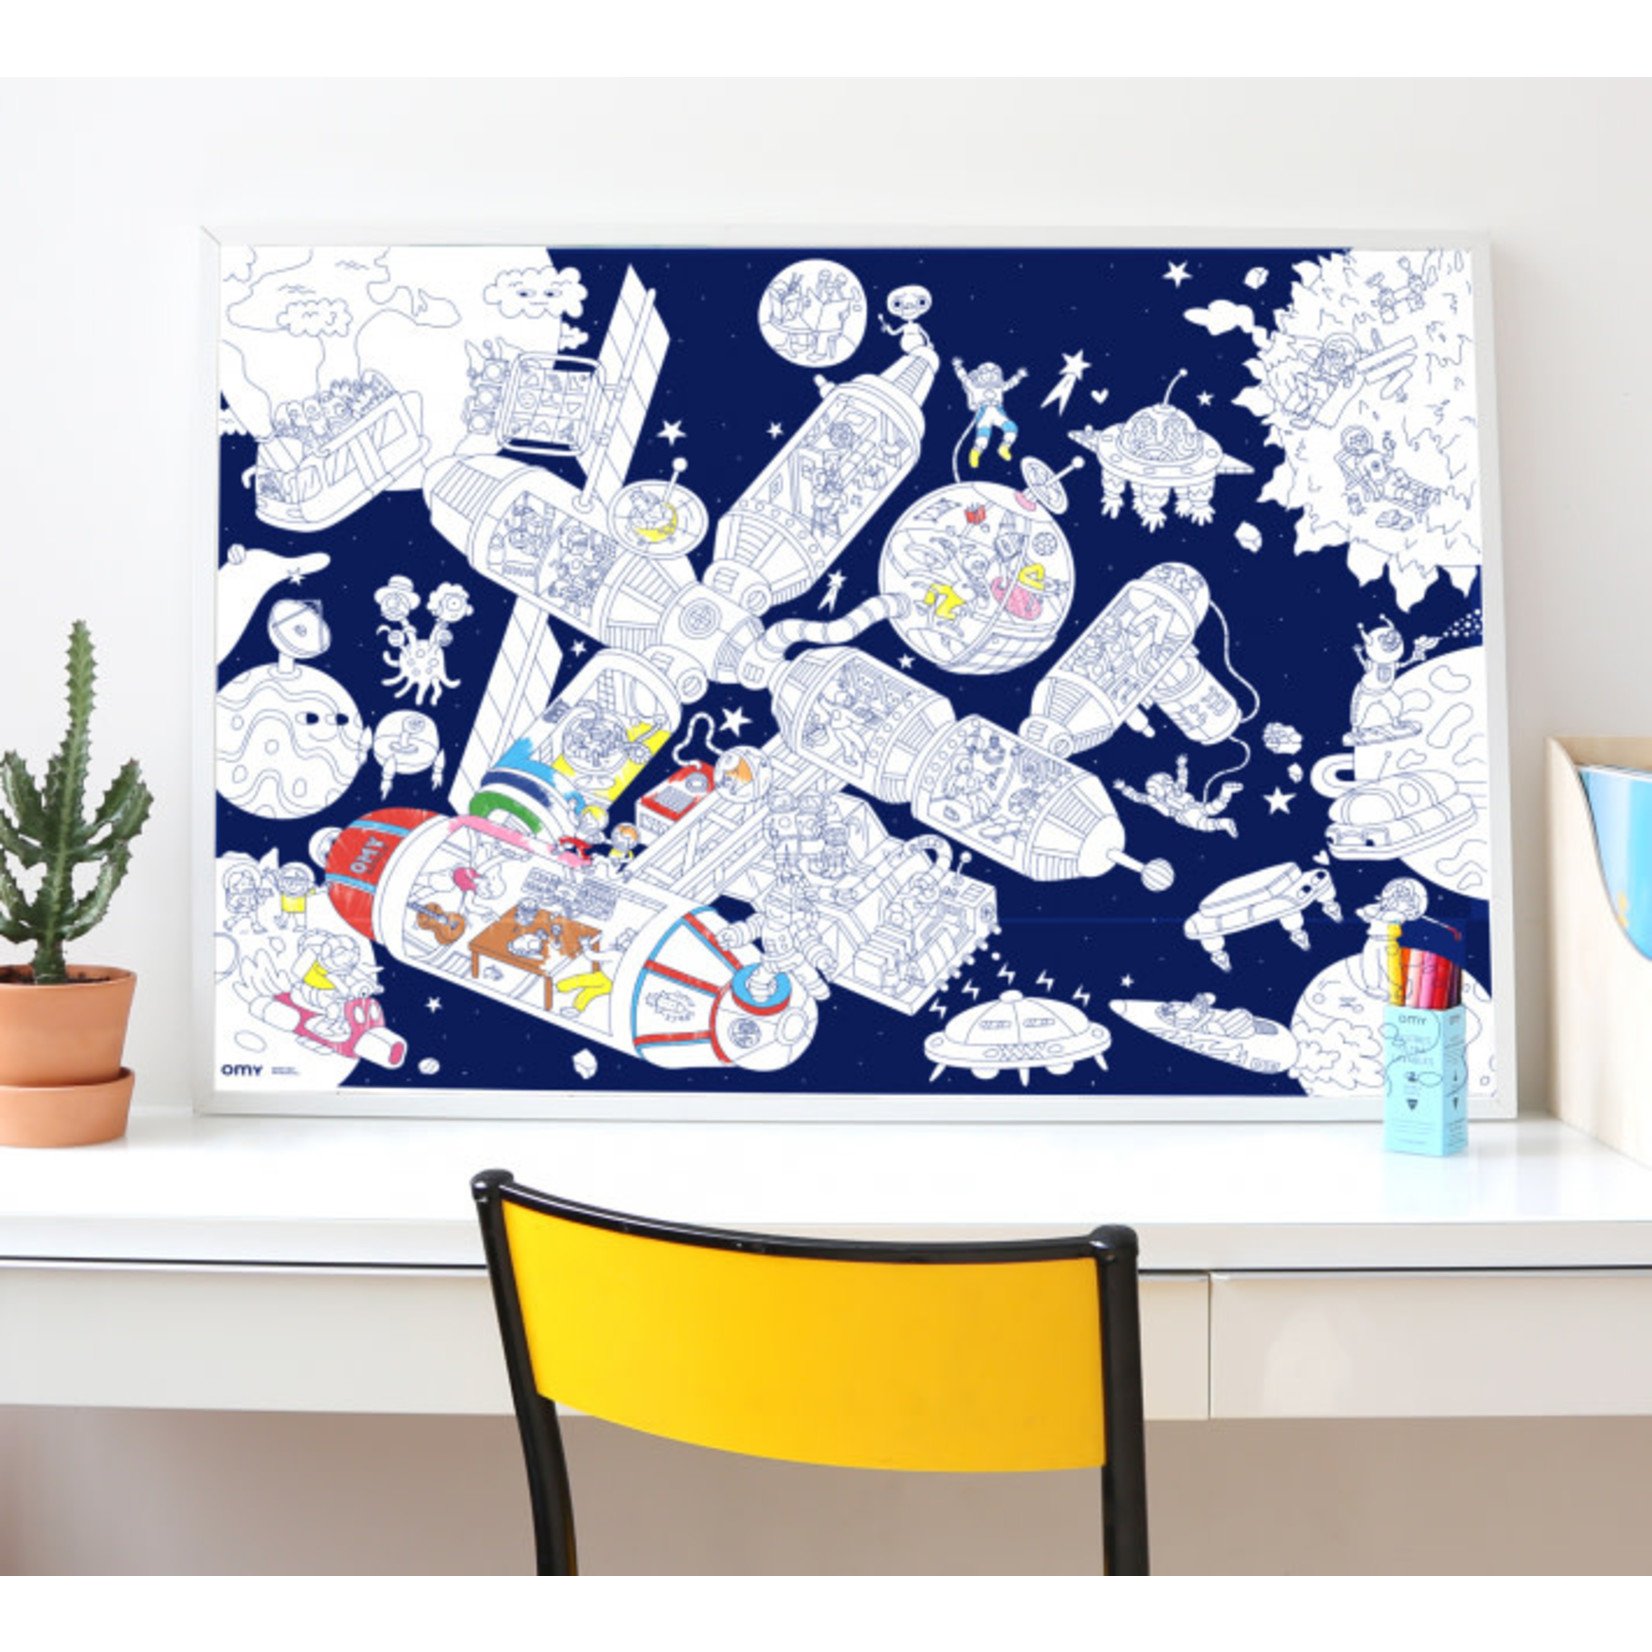 Omy Omy – Poster géant à colorier – space + stickers